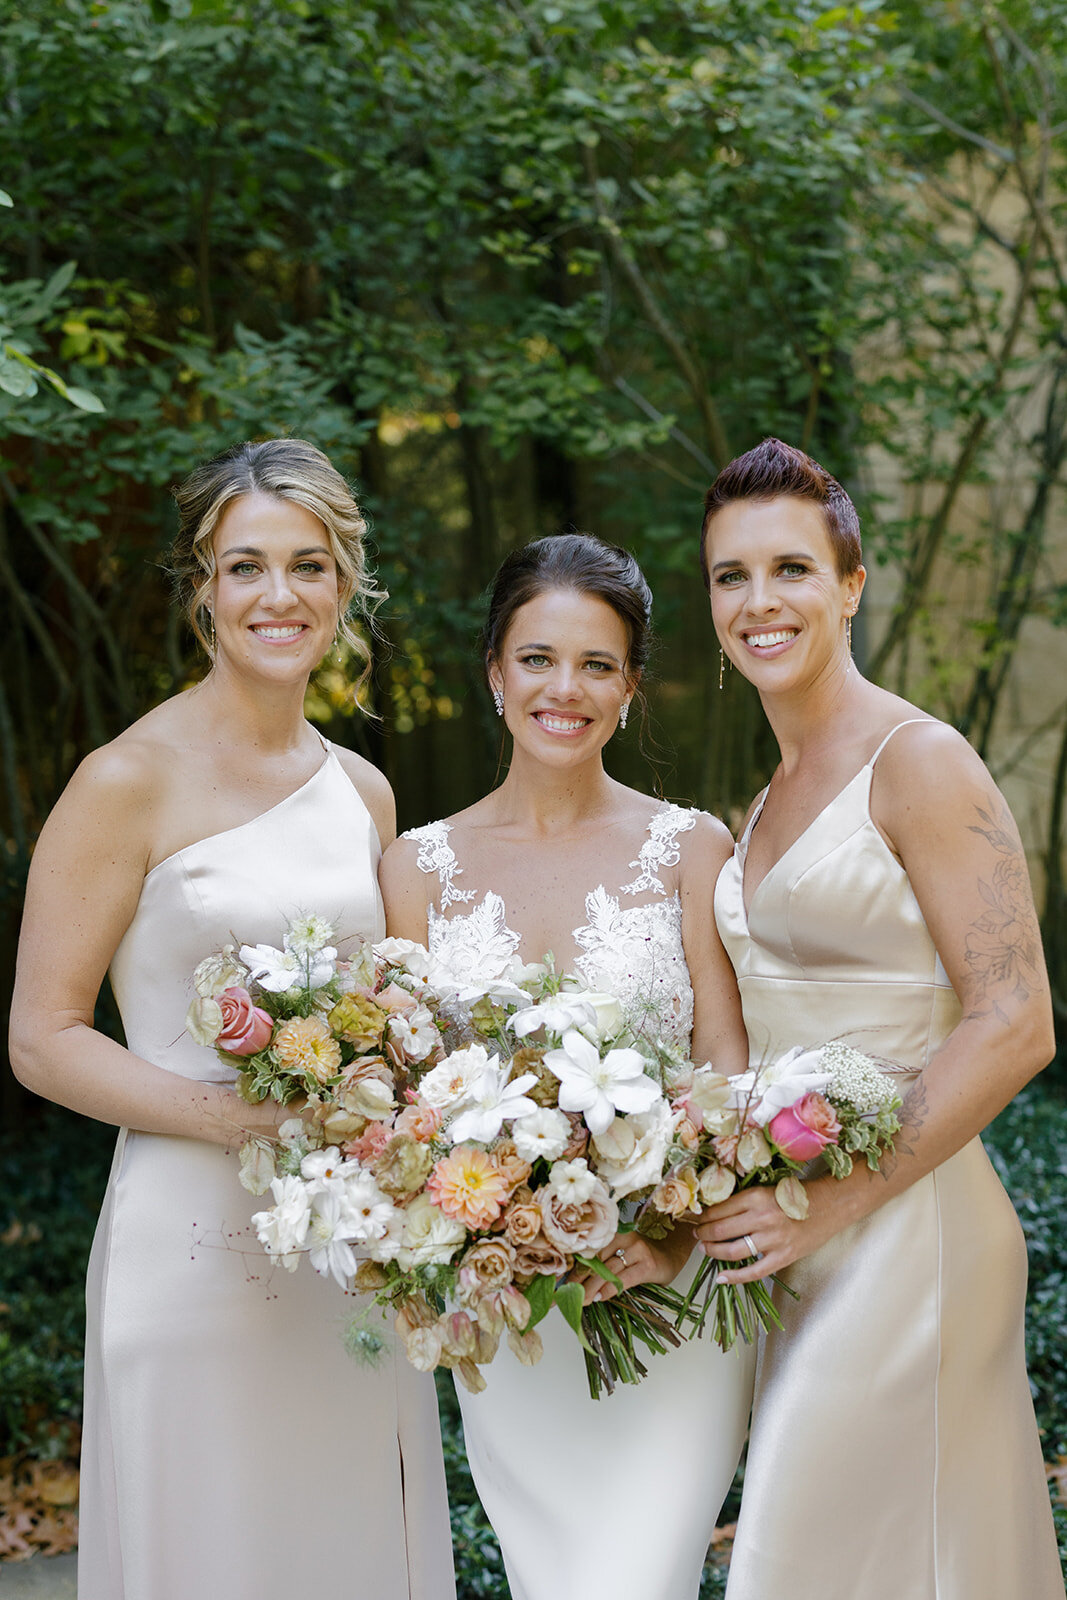 Fall bridesmaids’ bouquets with lush autumnal colors of mauve, dusty pink, cream, white, peach, taupe, and green. Florals of dahlias, roses, clematis, lisianthus, and natural greenery. Fall wedding in Raleigh, NC. Design by Rosemary and Finch Floral Design in Nashville, TN.